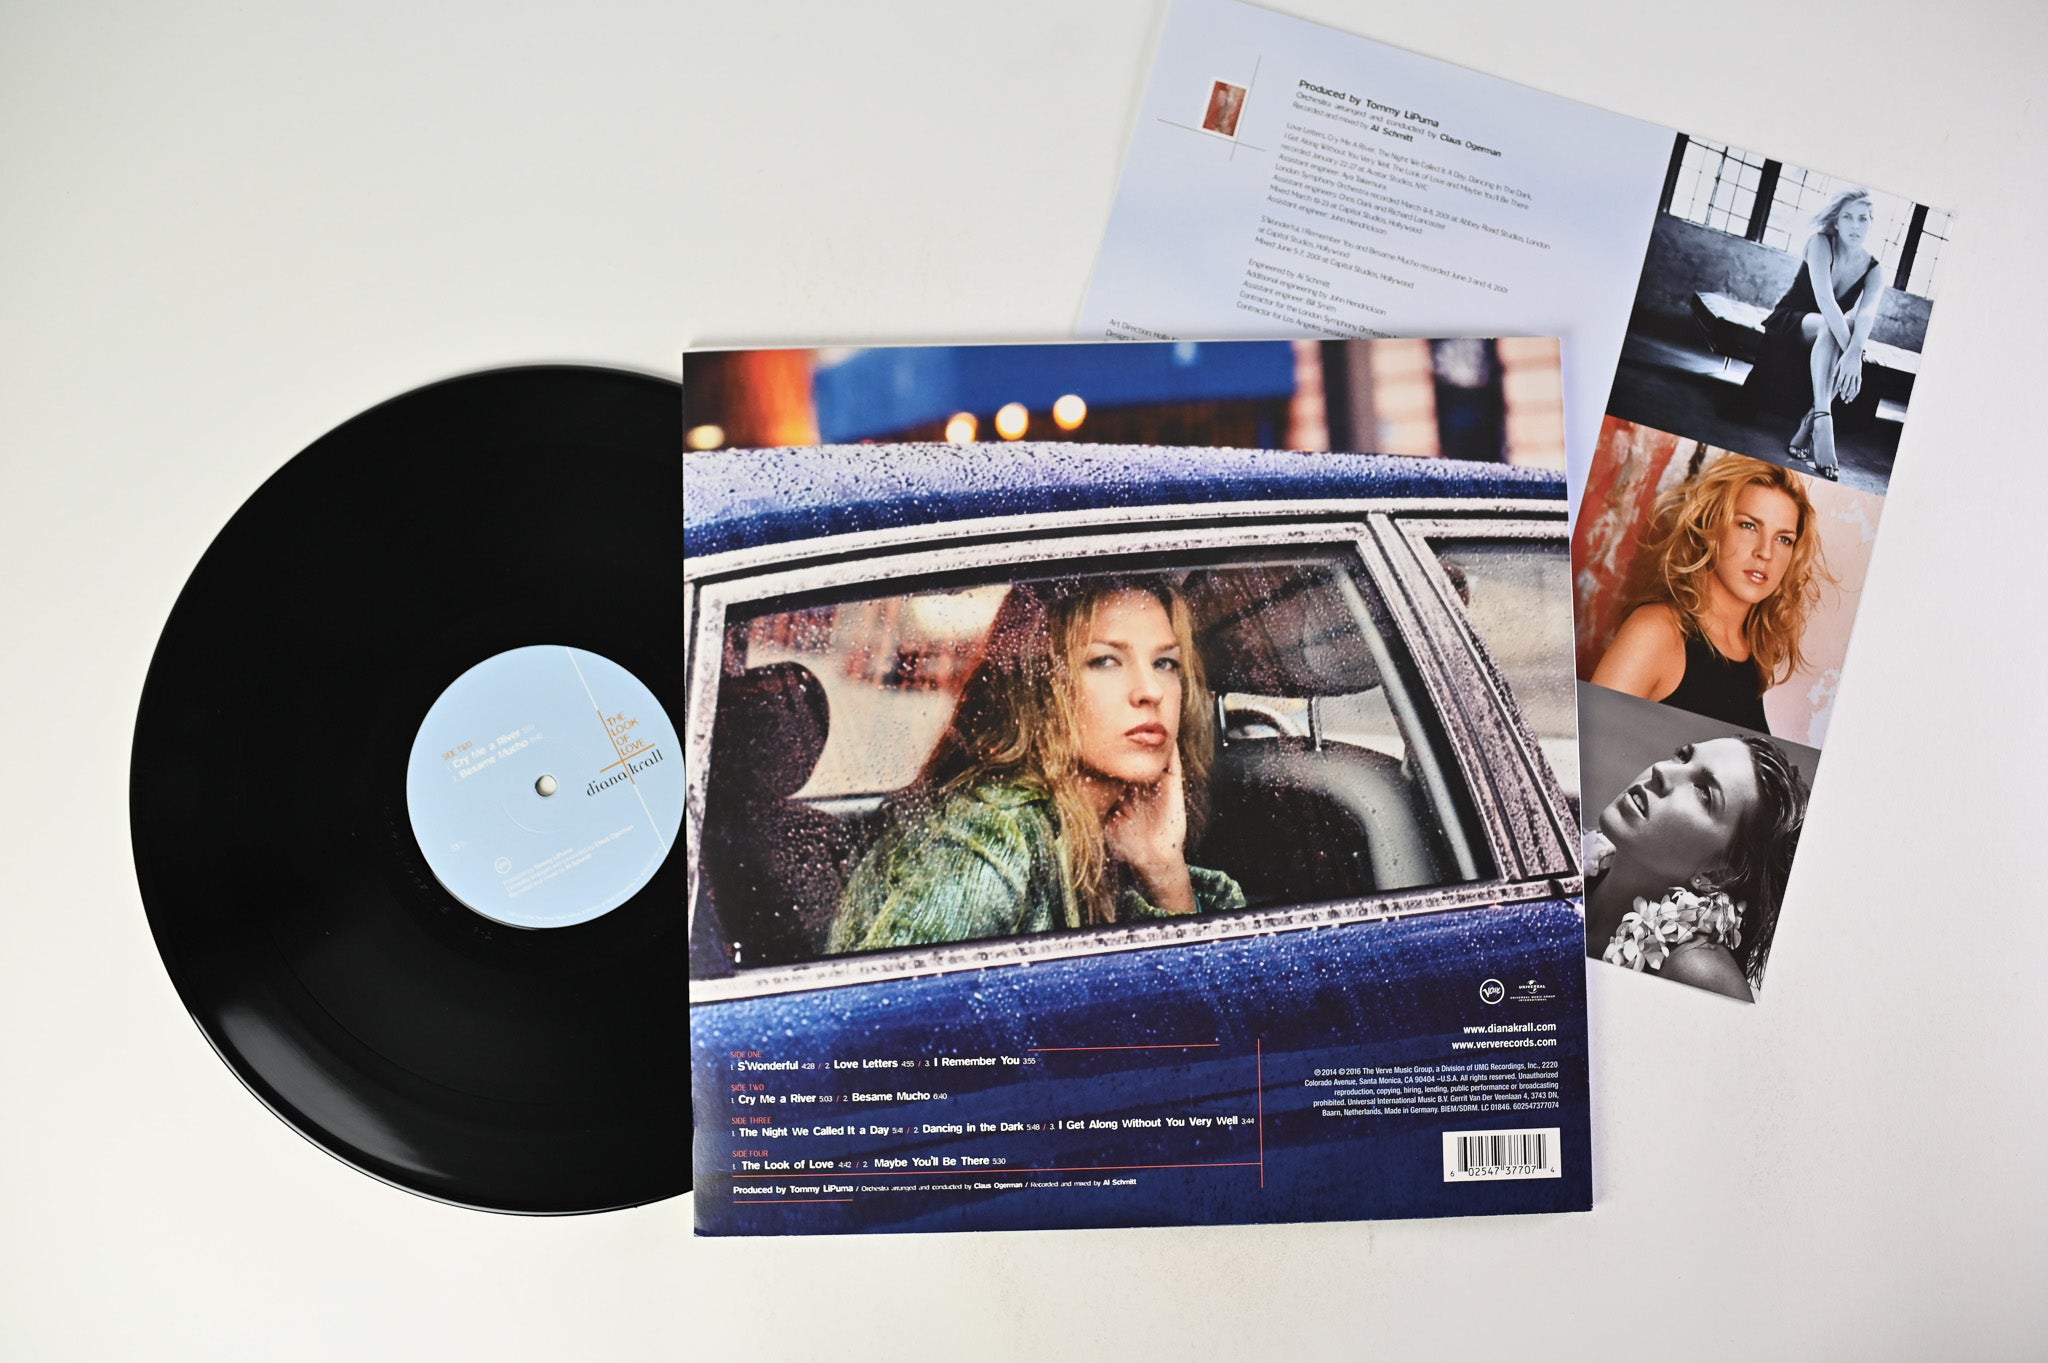 Diana Krall - The Look Of Love Reissue on Verve Records